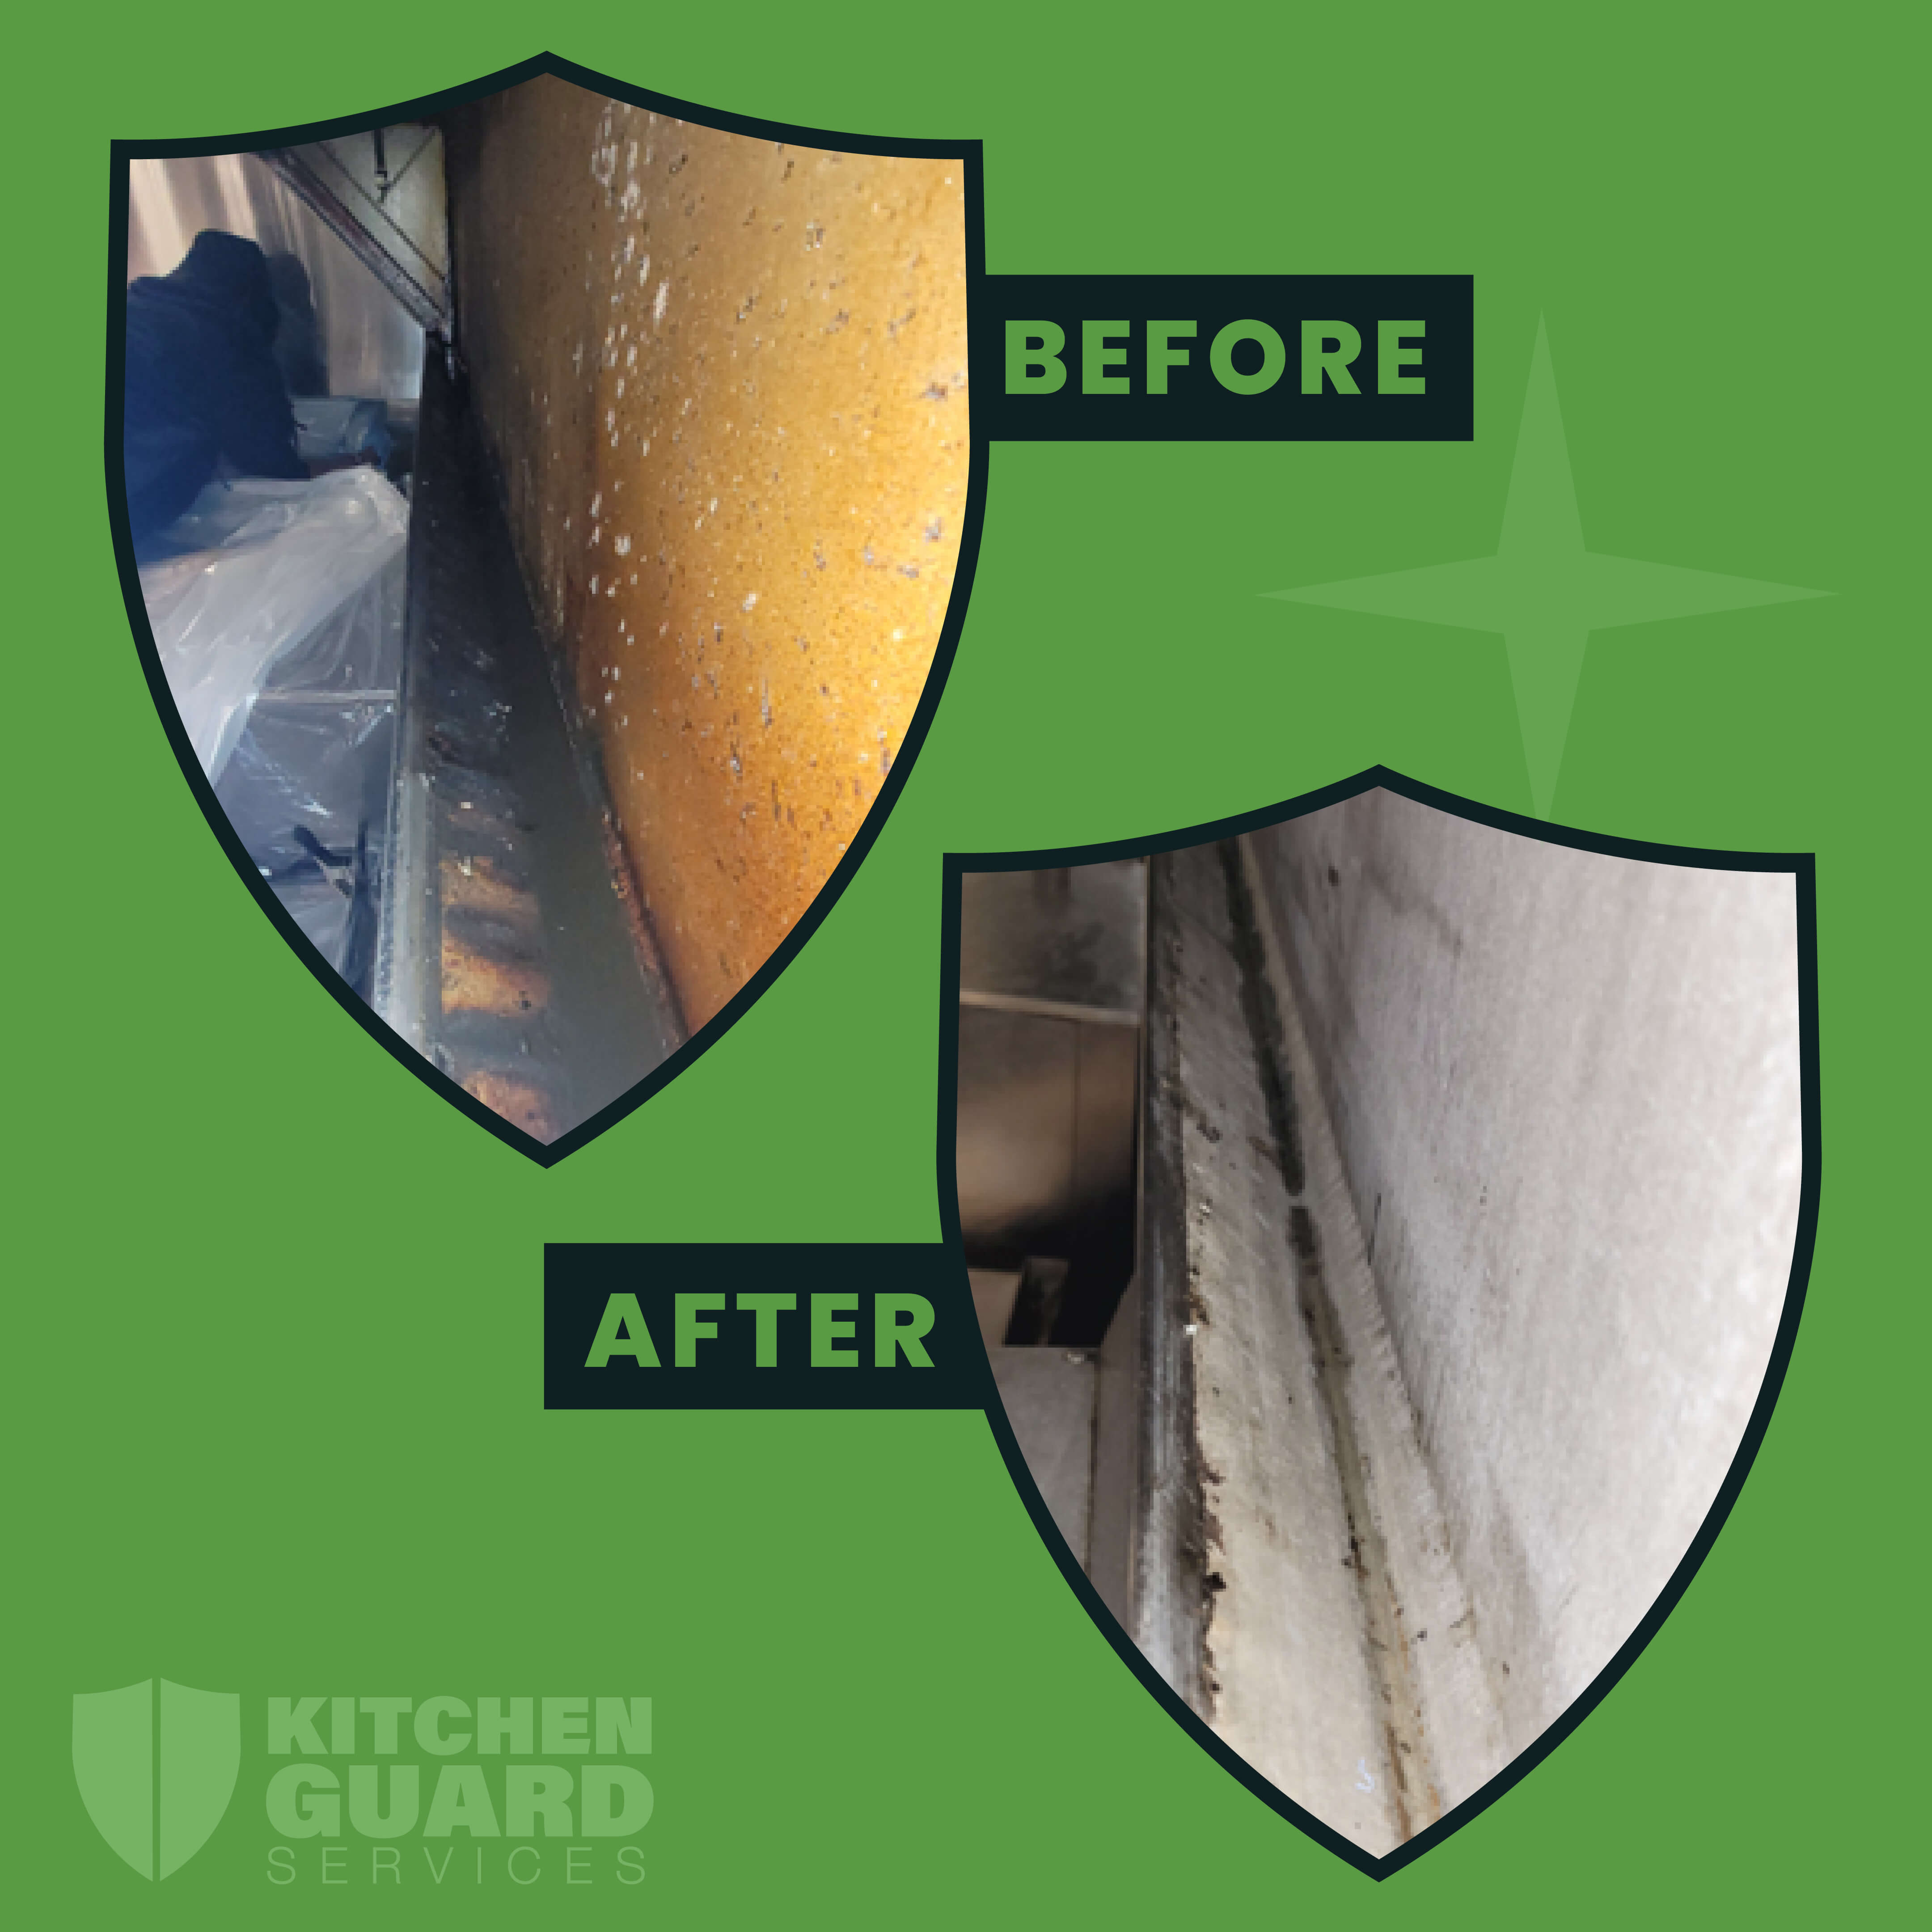 image of before and after of a dirty kitchen exhaust vs a clean kitchen exhaust on green frame